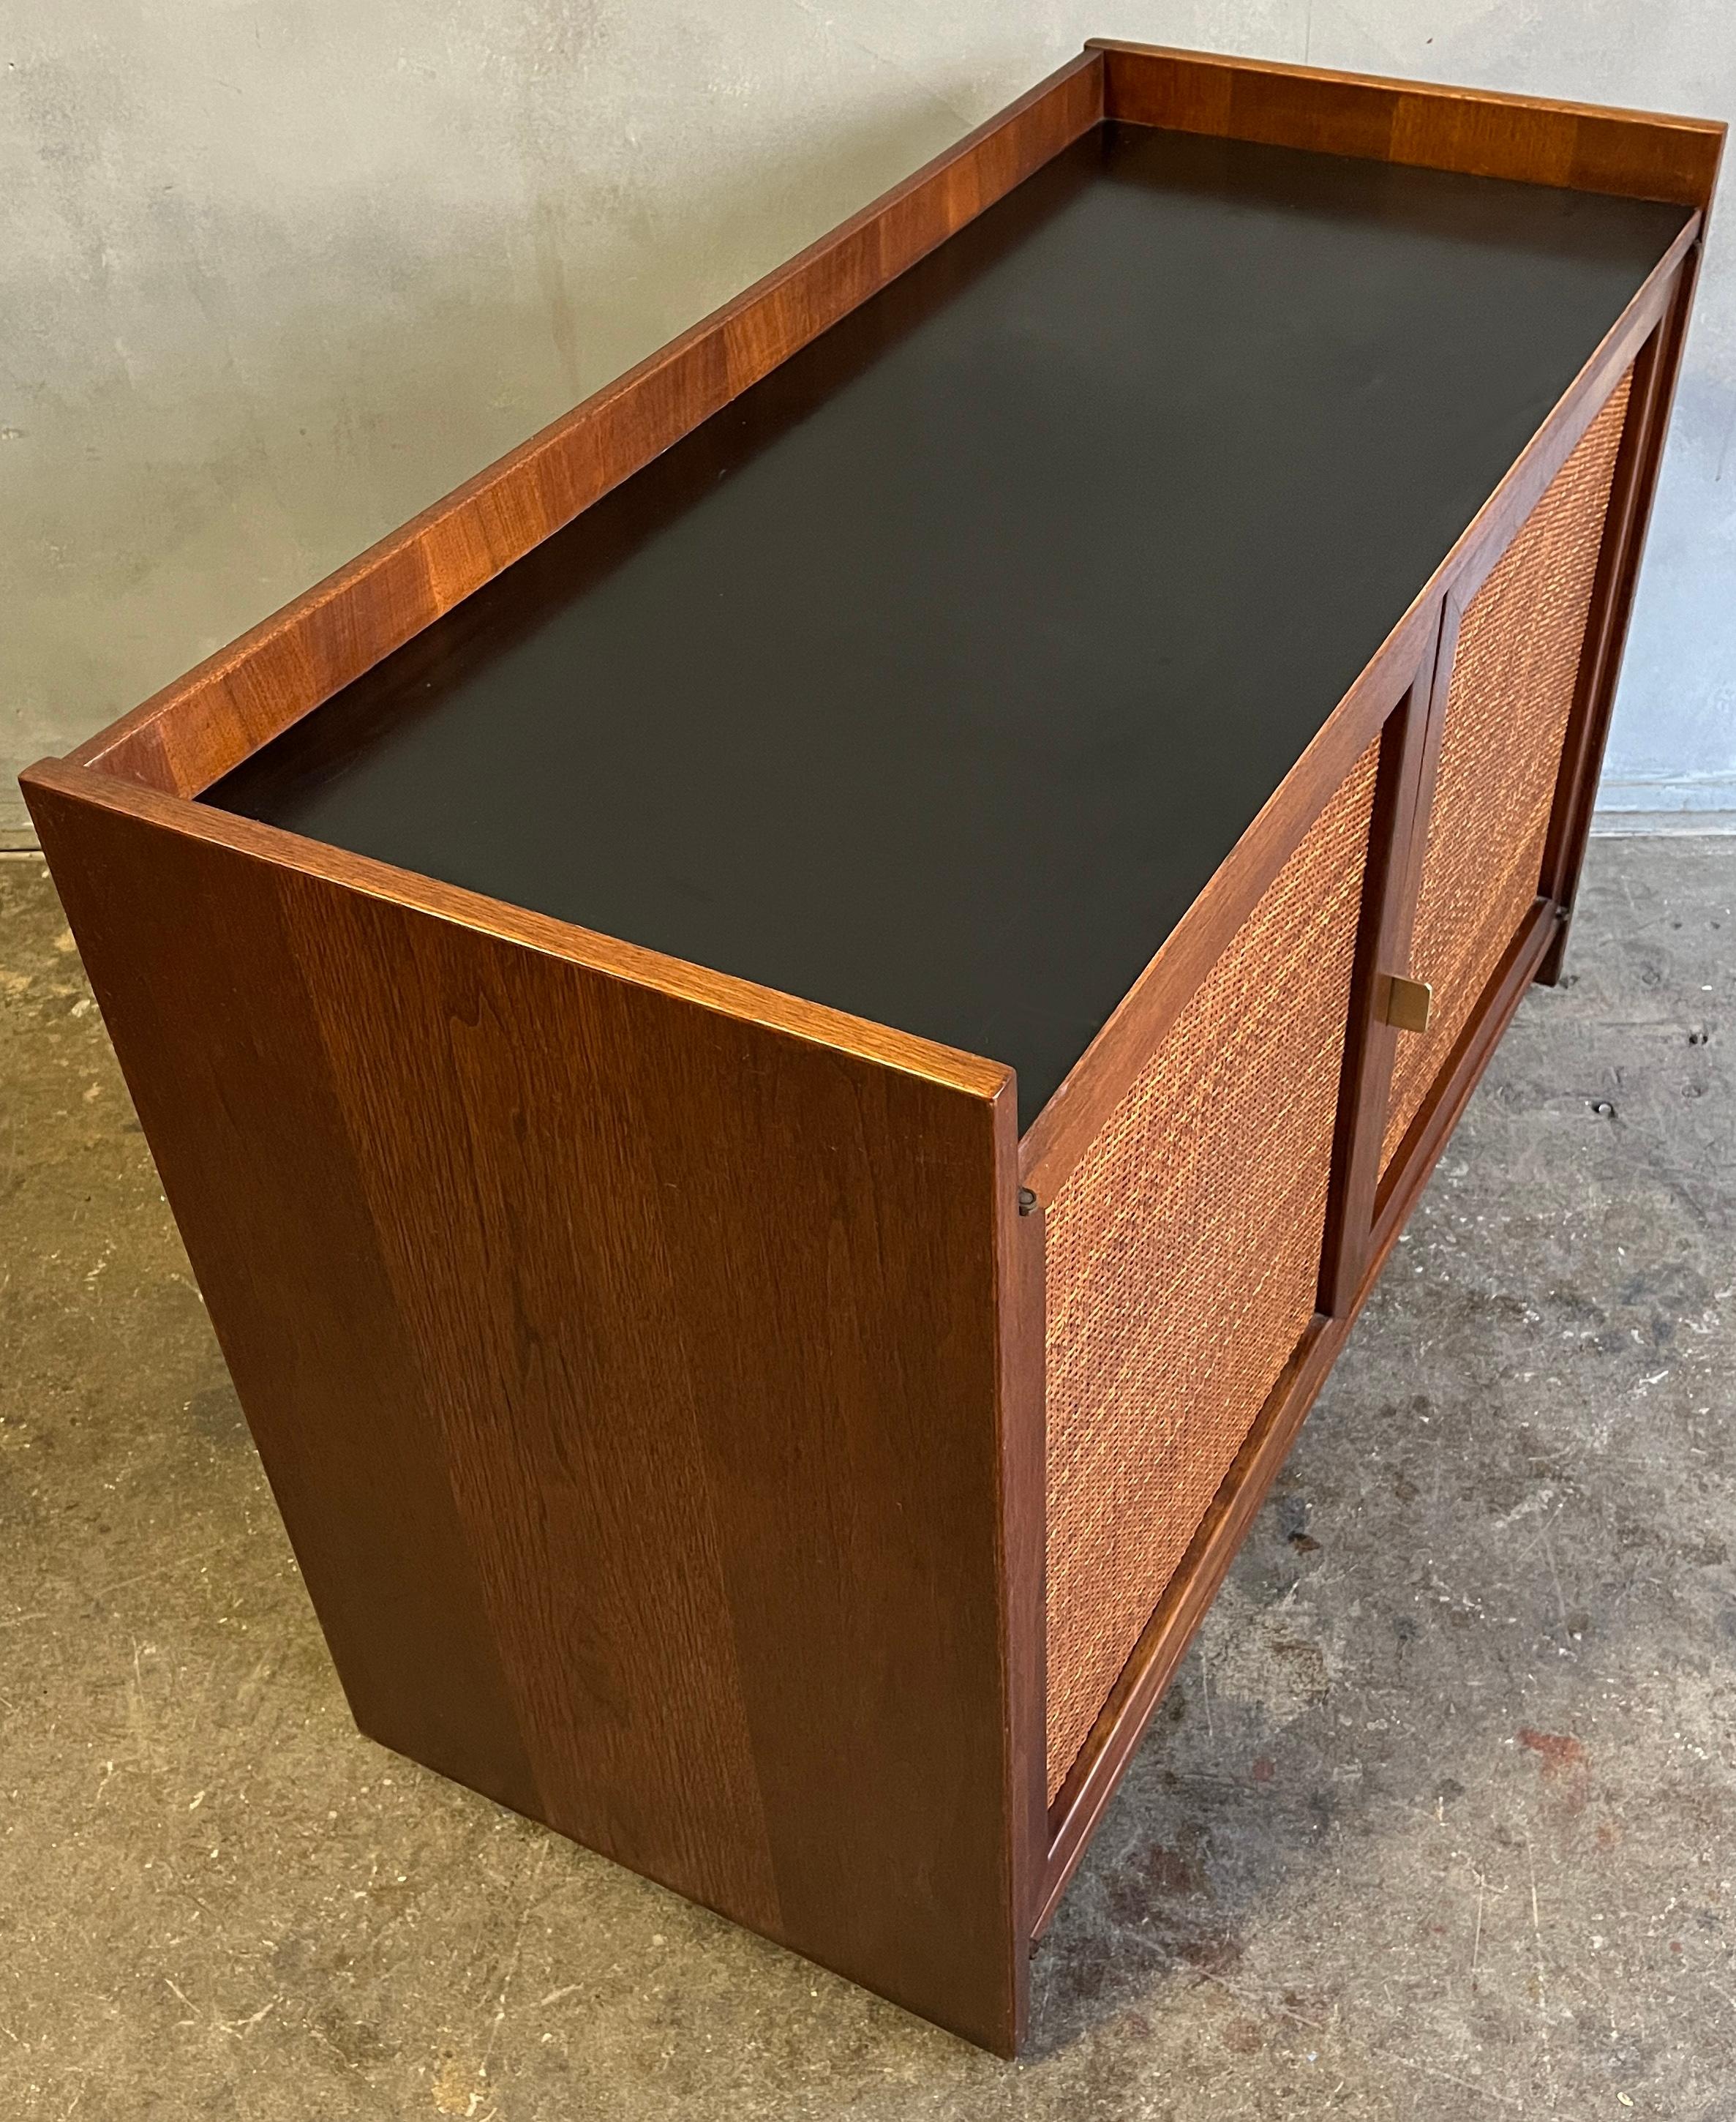 Midcentury double cane doors with gallery laminated top featuring two adjustable shelves and one pull our drawer. This item has a finished back and floating plinth base with hidden wheels on the underside. Superb quality walnut piece from the